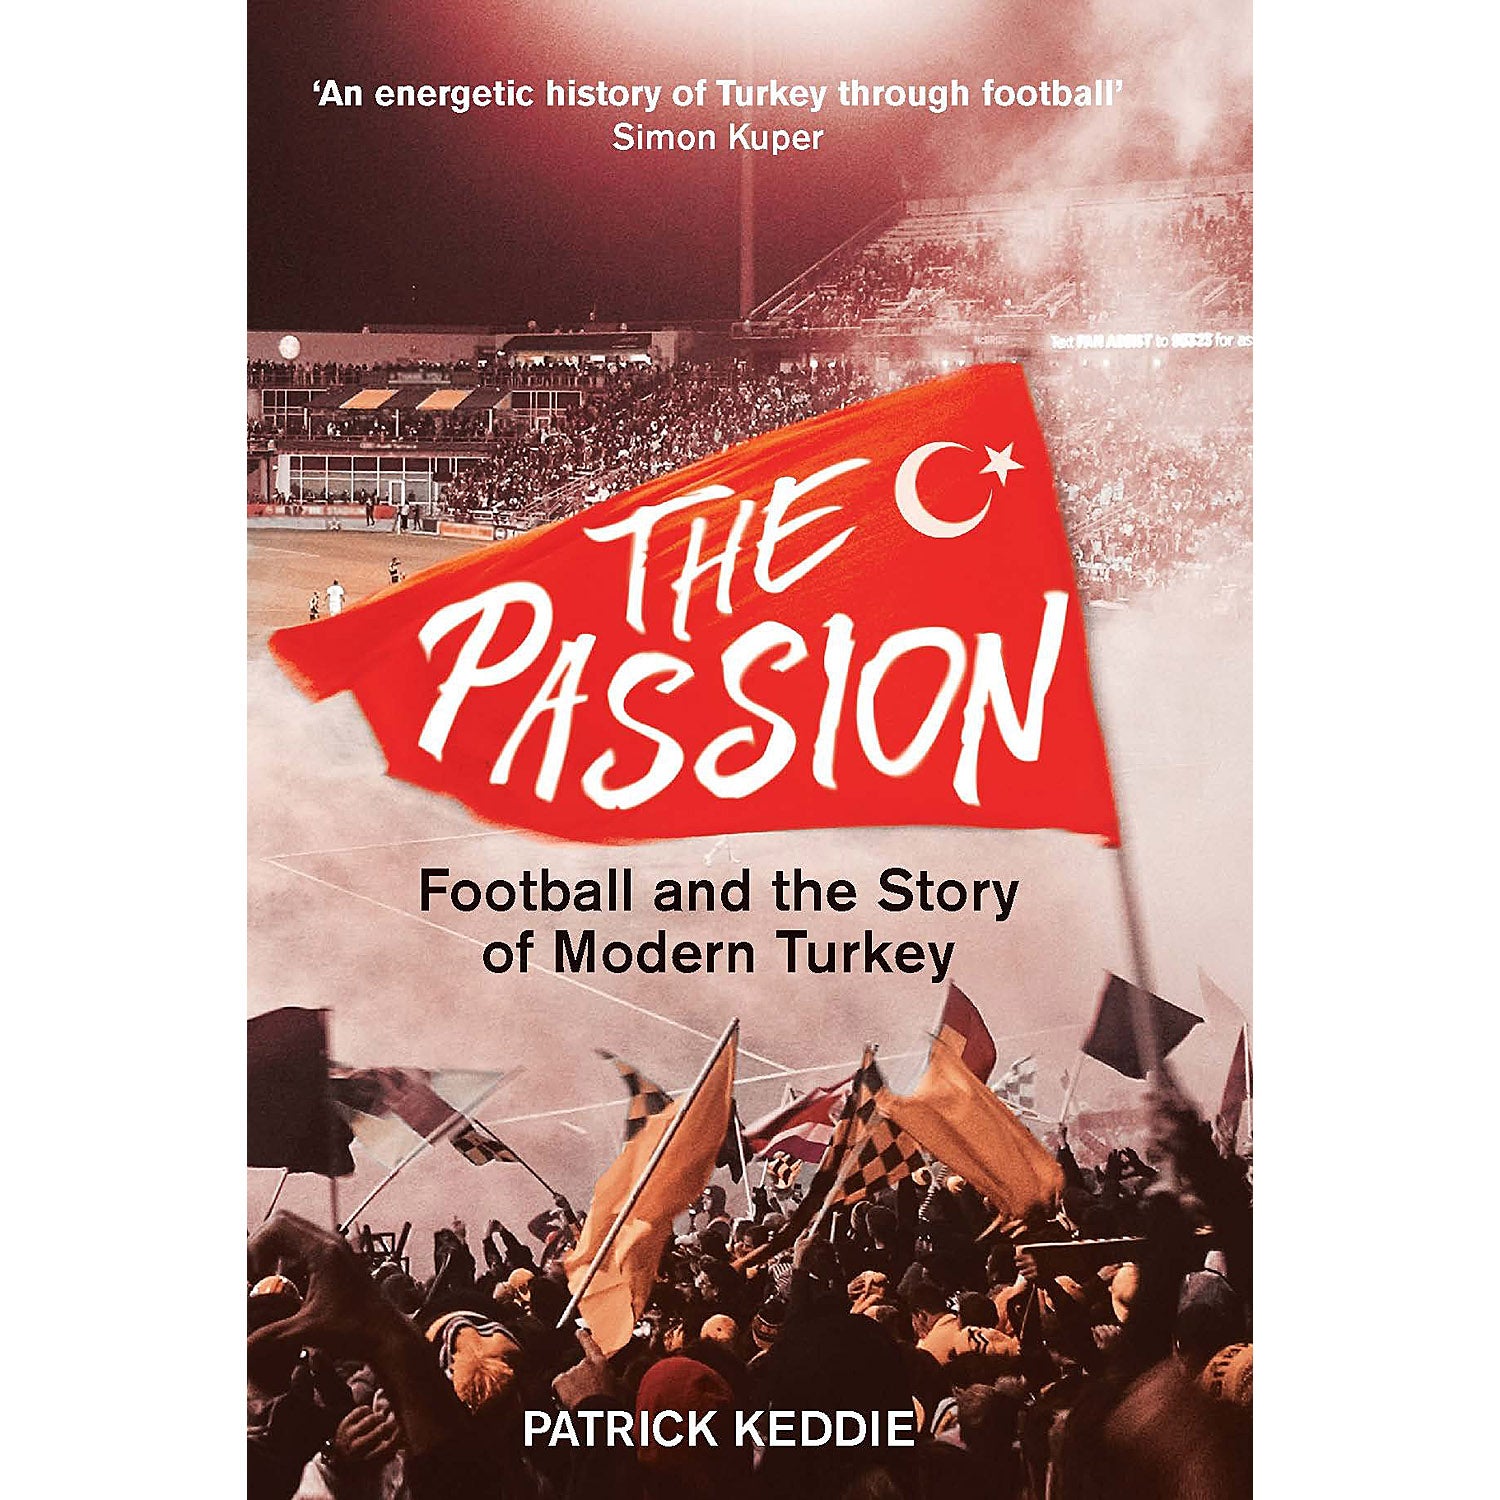 The Passion – Football and the Story of Modern Turkey